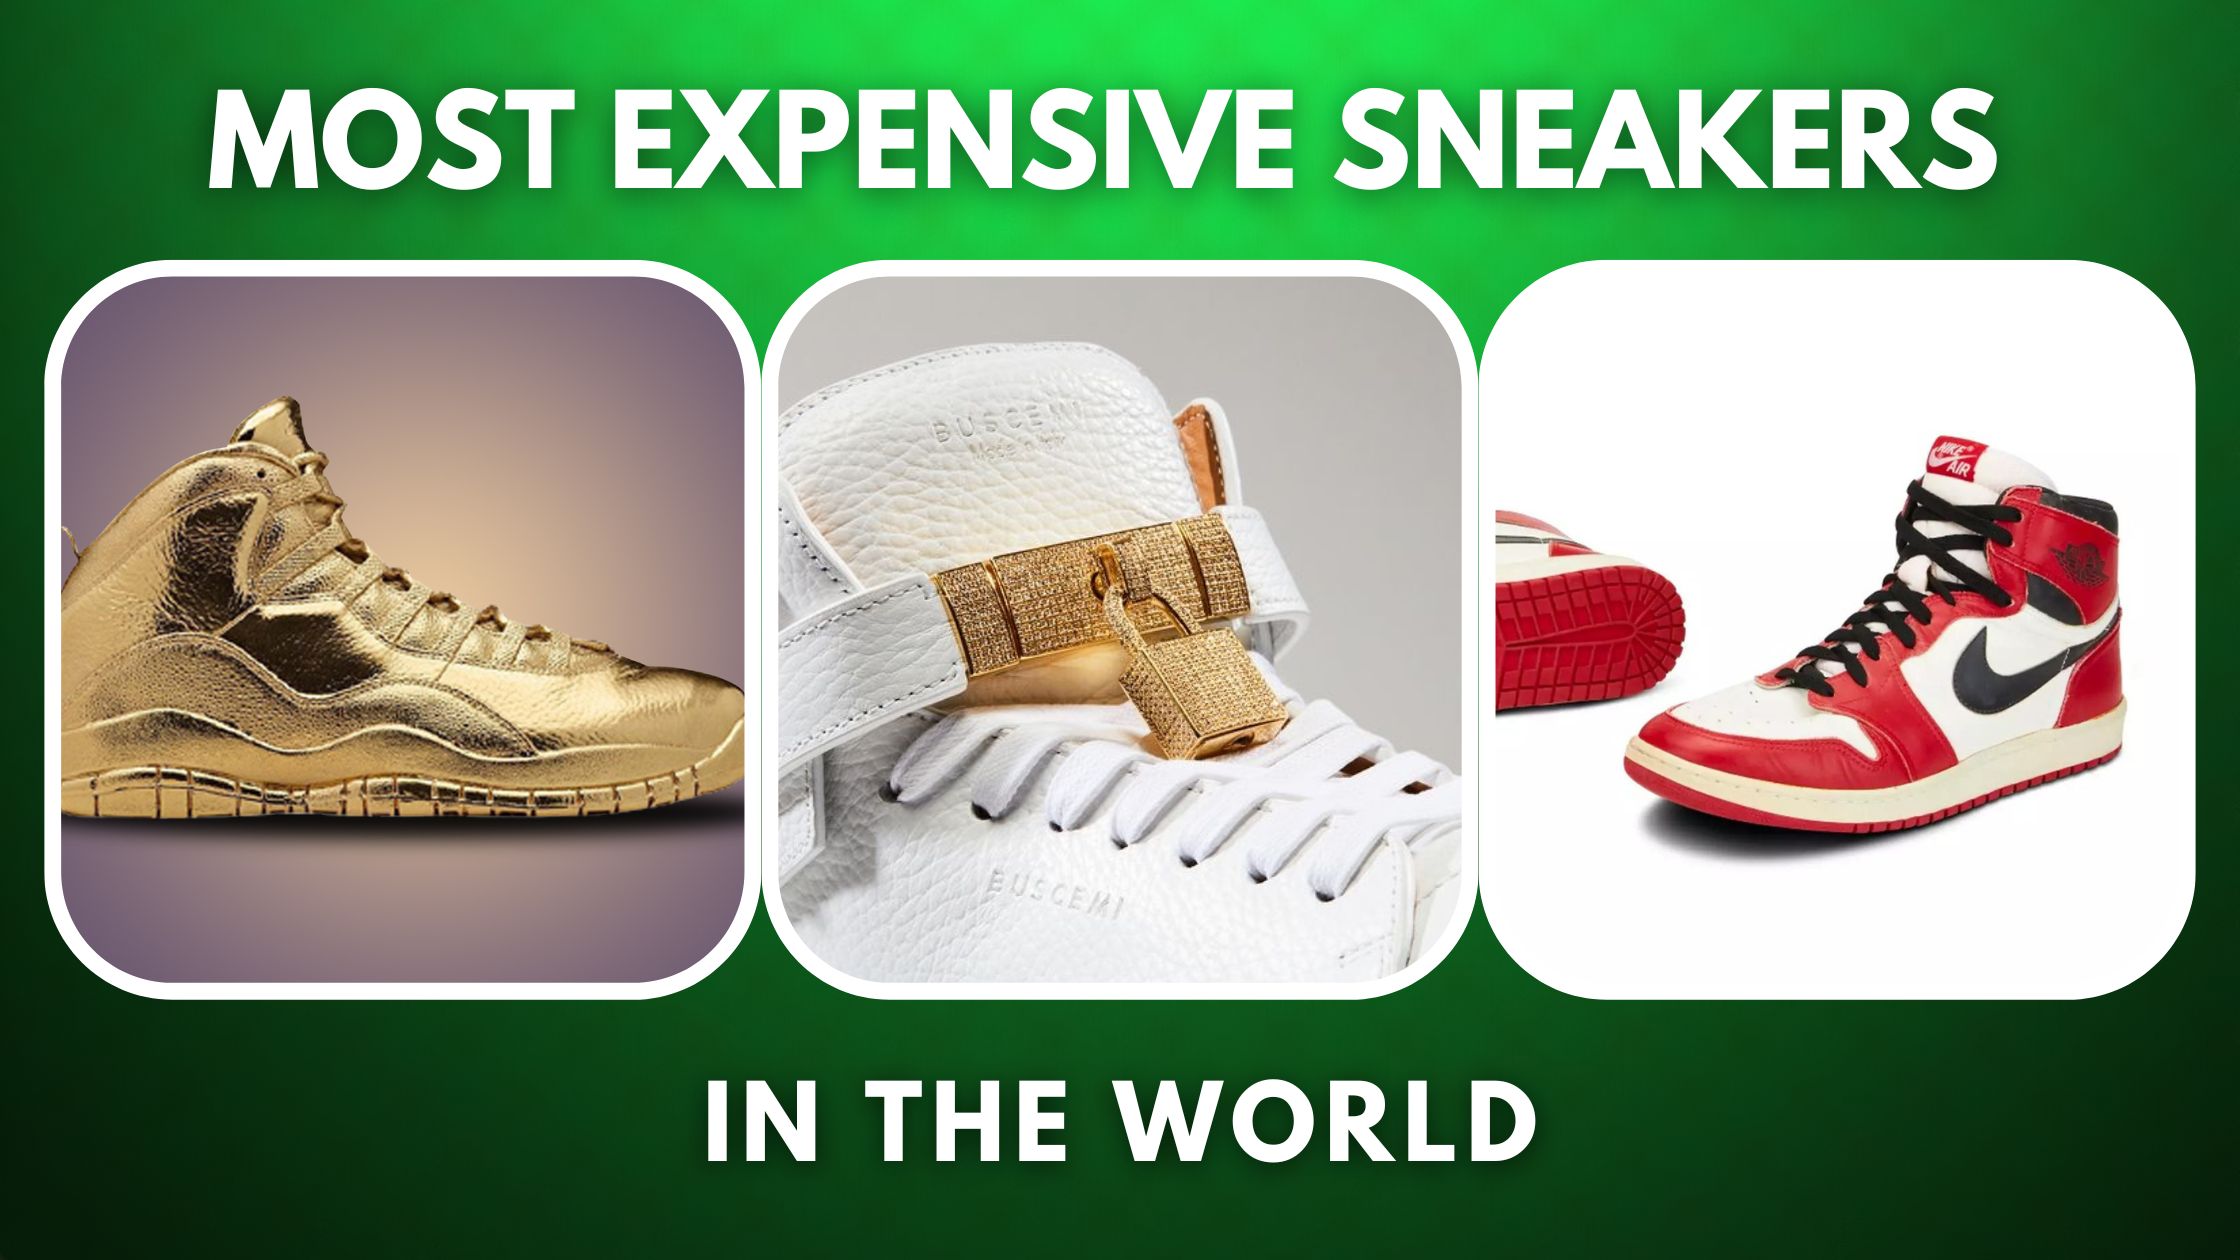 Check out these $132,000 diamond sneakers that are probably the